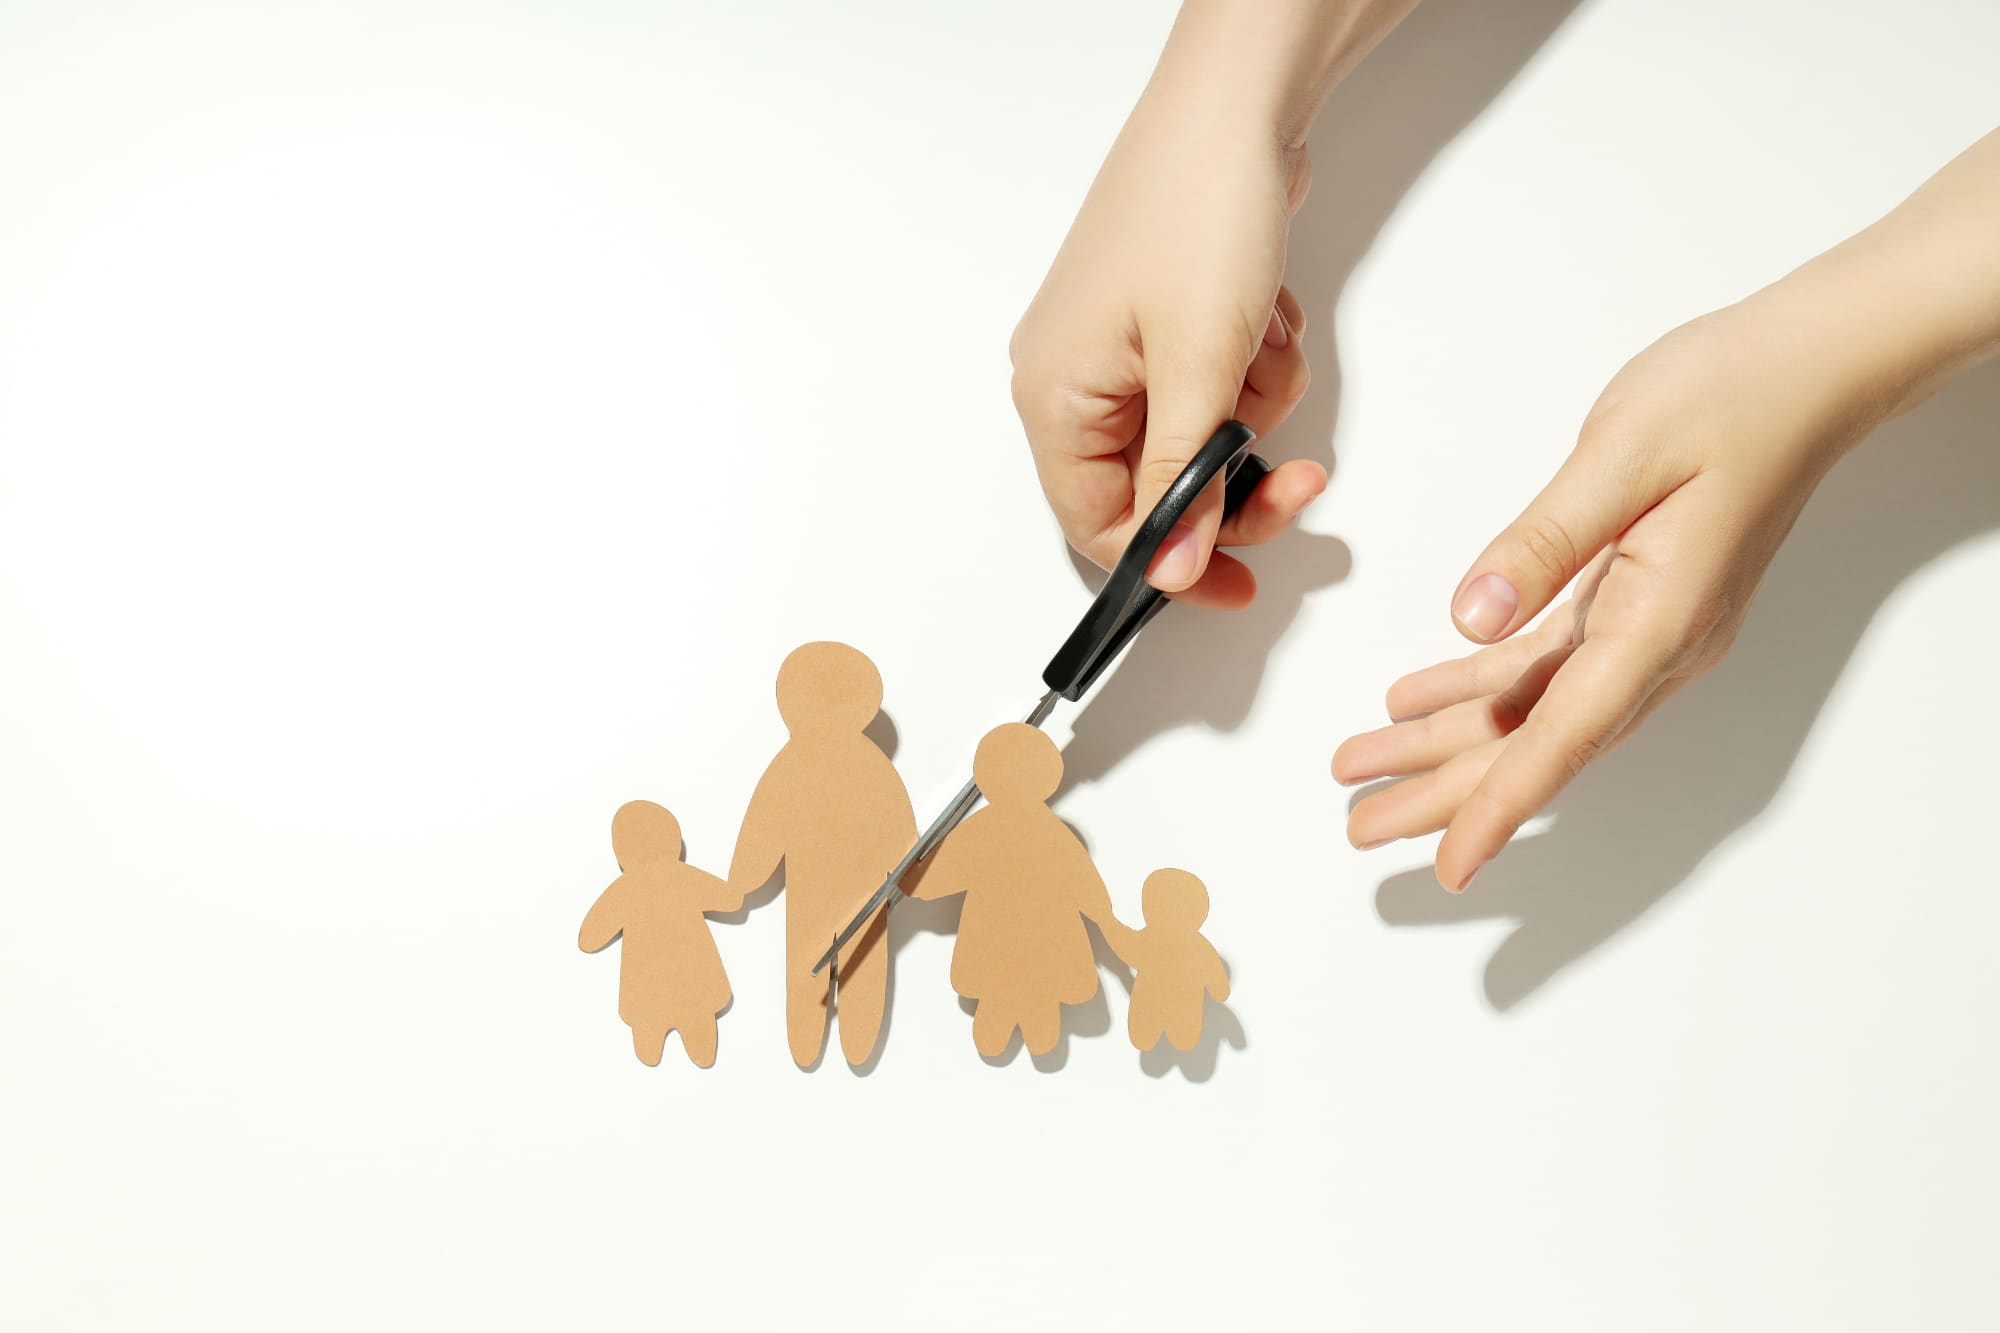 Concept of family divorce, problems in family relationships